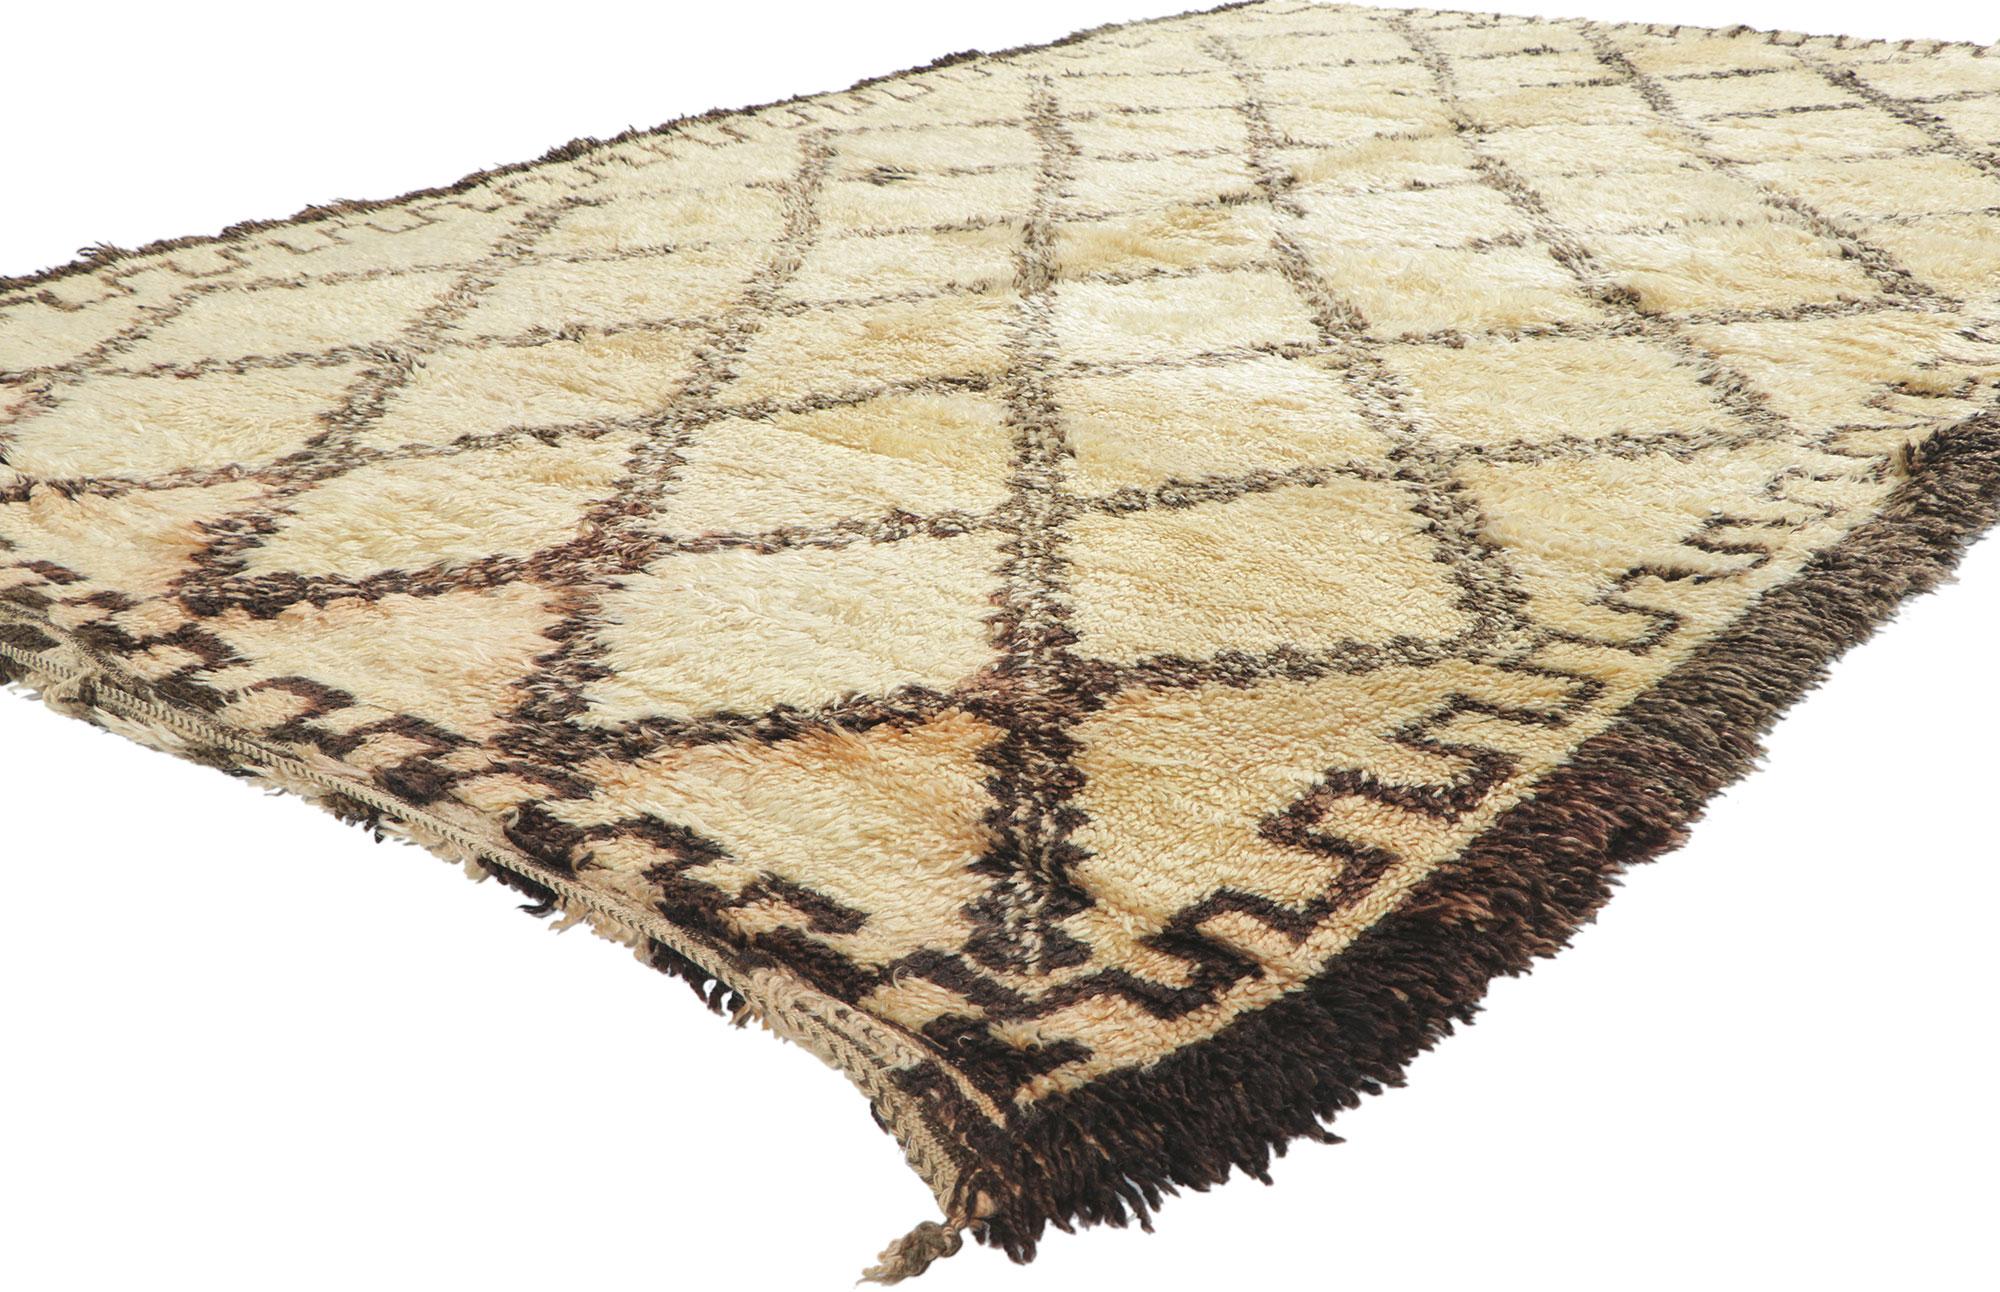 78381 Vintage Moroccan Beni Ourain rug, 06'04 x 10'00. With its simplicity, plush pile, incredible detail and texture, this hand knotted wool vintage Beni Ourain Moroccan rug is a captivating vision of woven beauty. The eye-catching diamond trellis